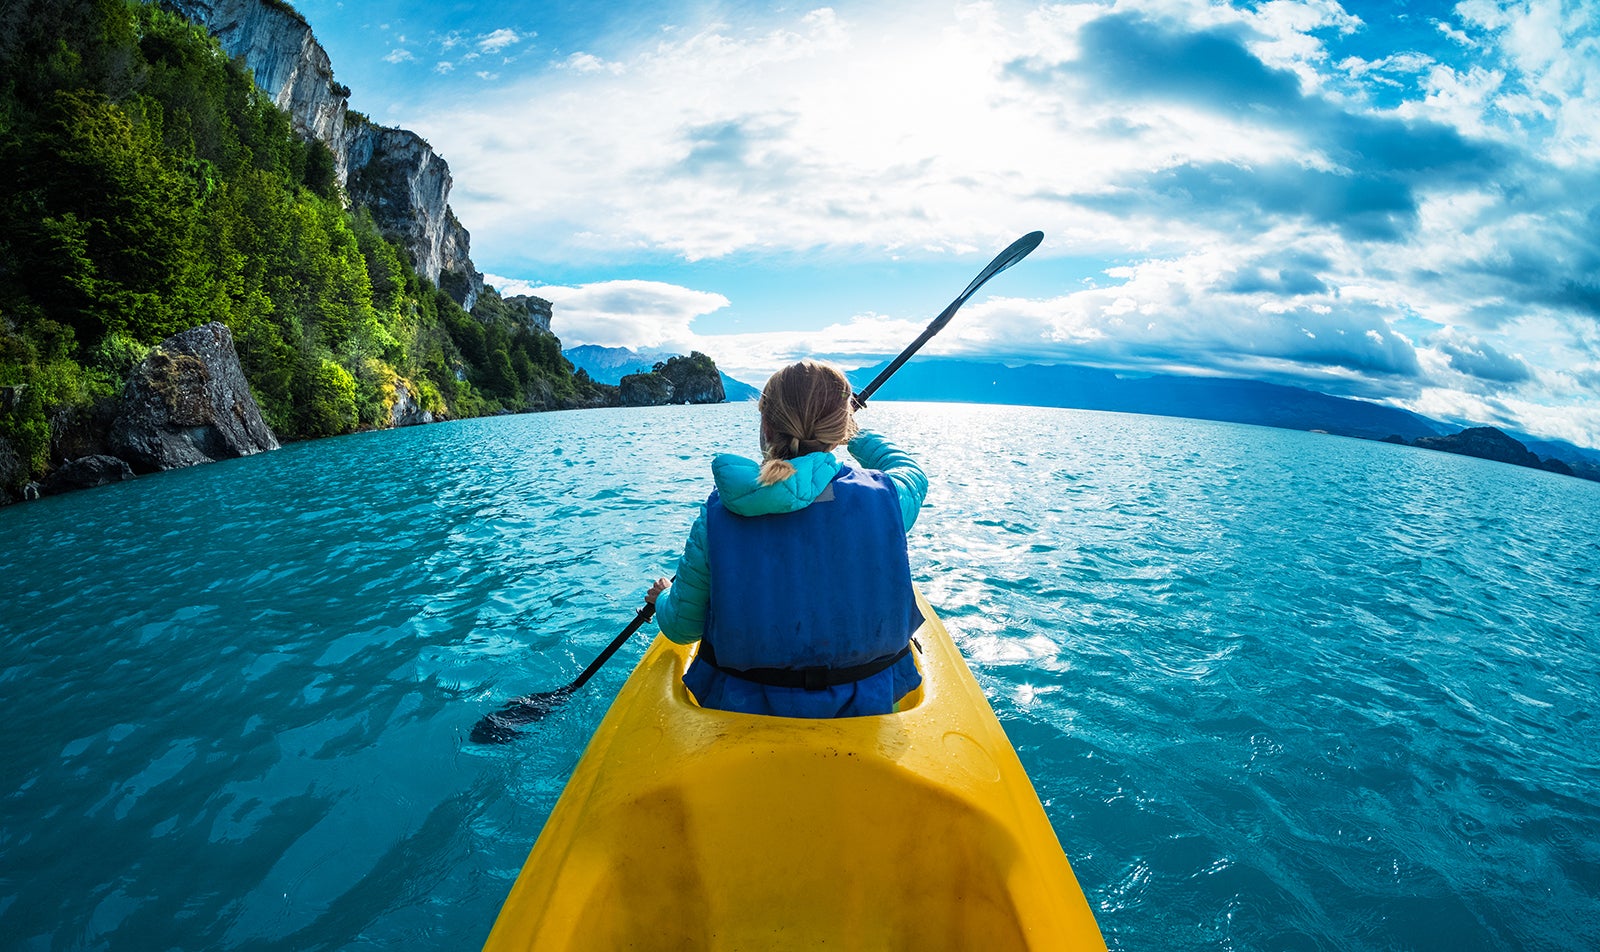 Woman paddles kayak in the lake with turquoise water